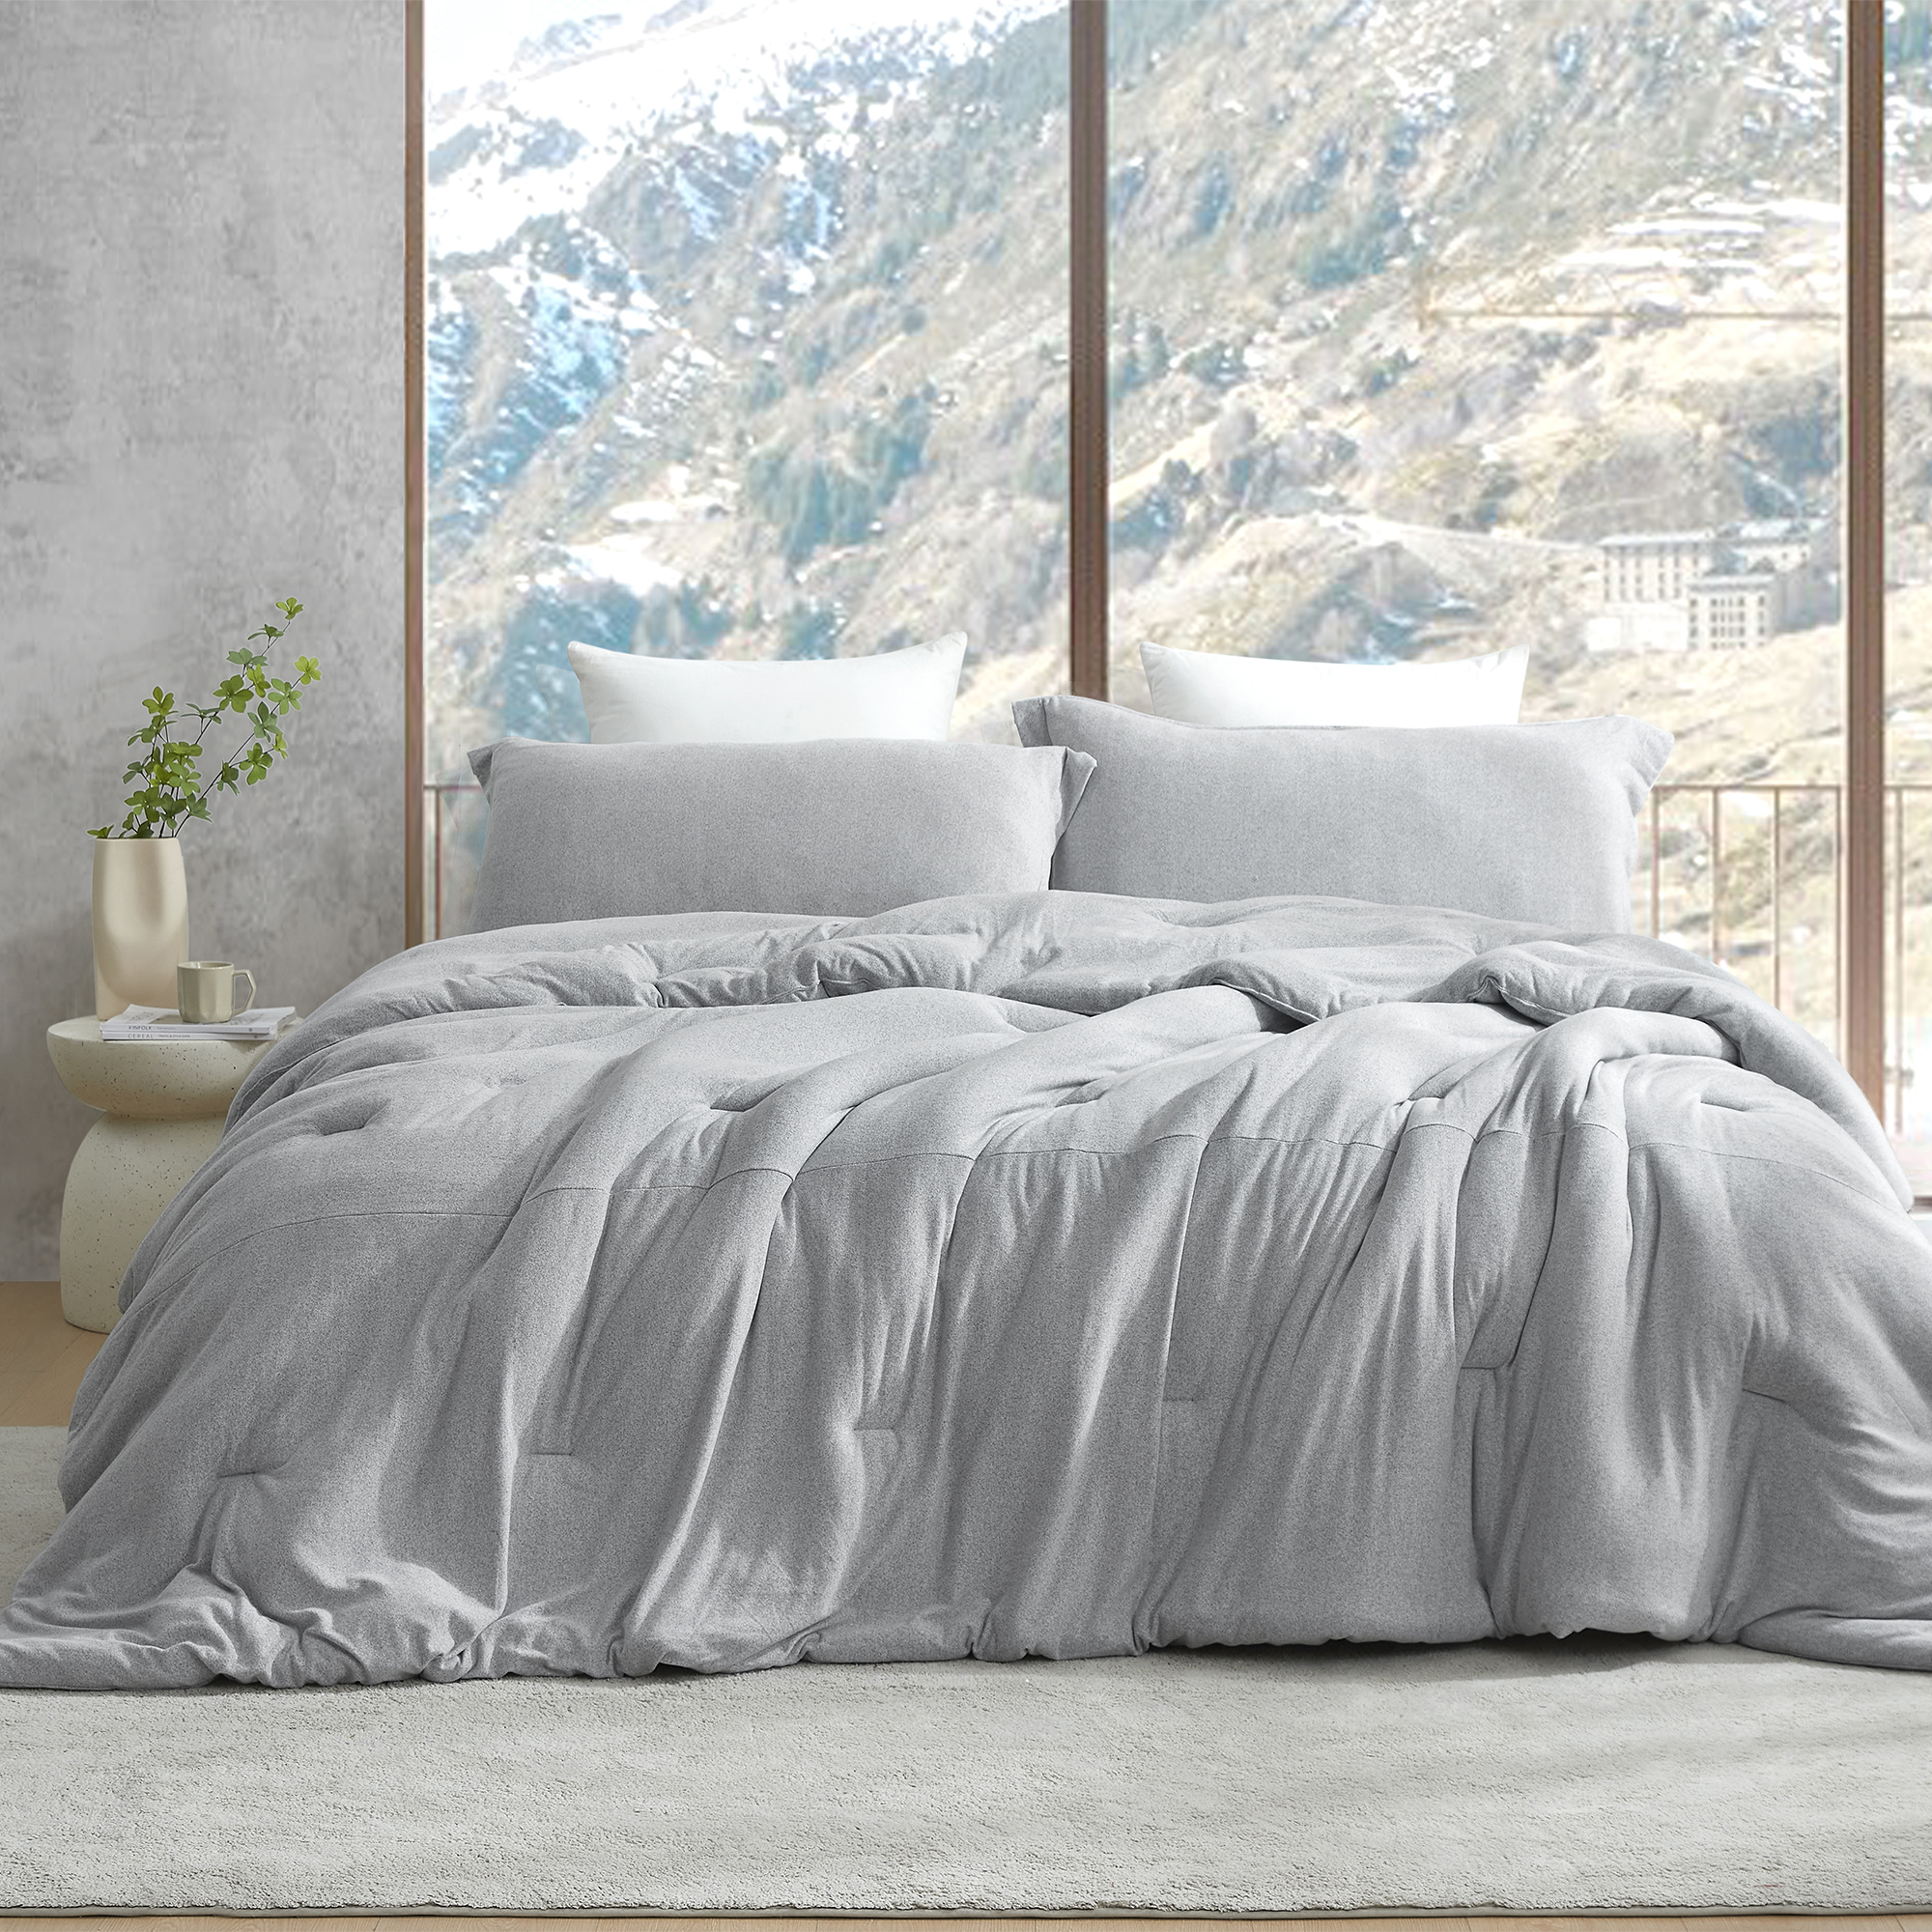 Sweater Weather - Coma Inducer® Oversized King Comforter - Glacier Gray